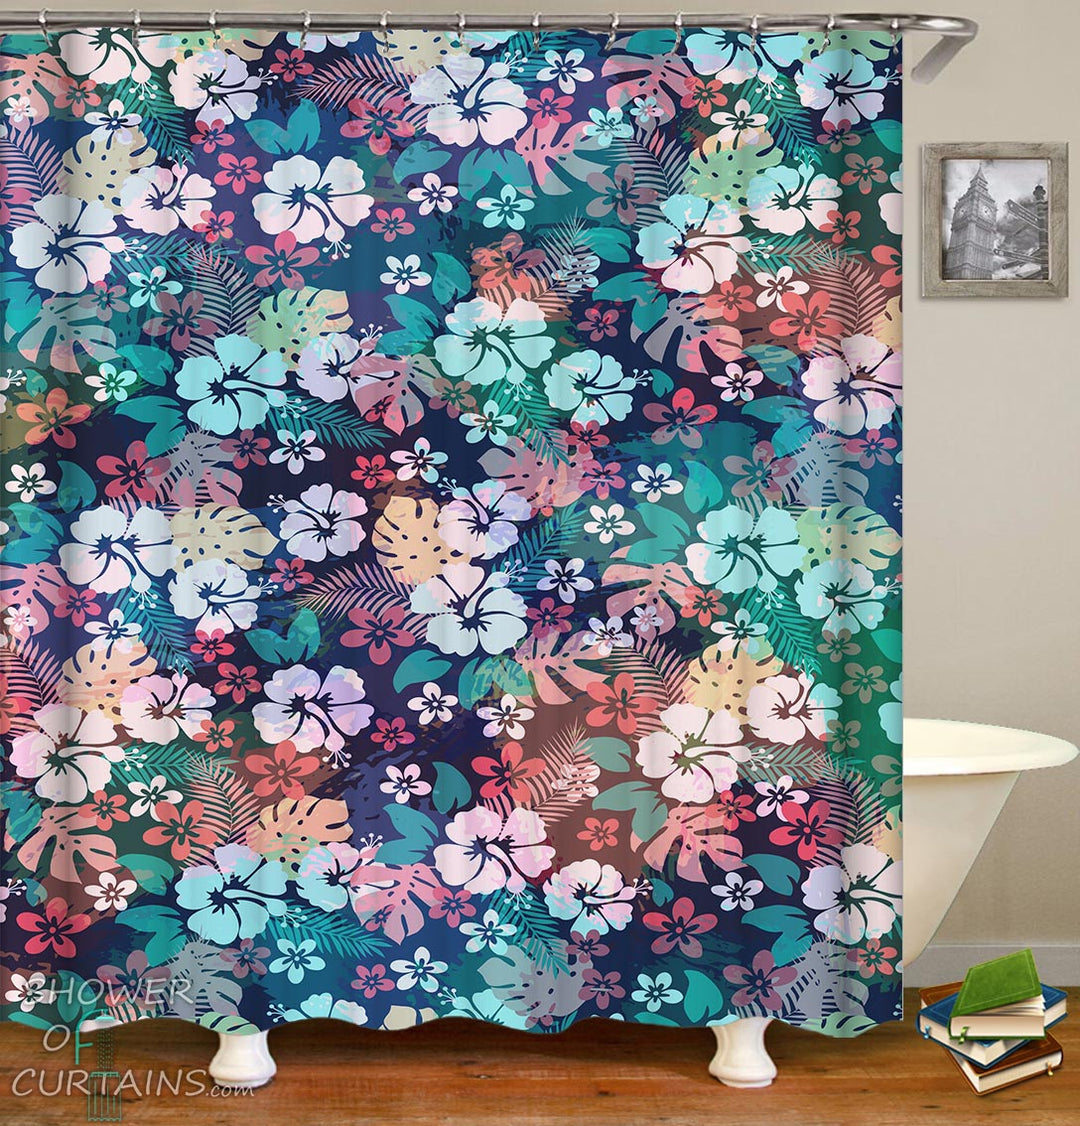 Multi Colored Tropical Flowers Shower Curtain